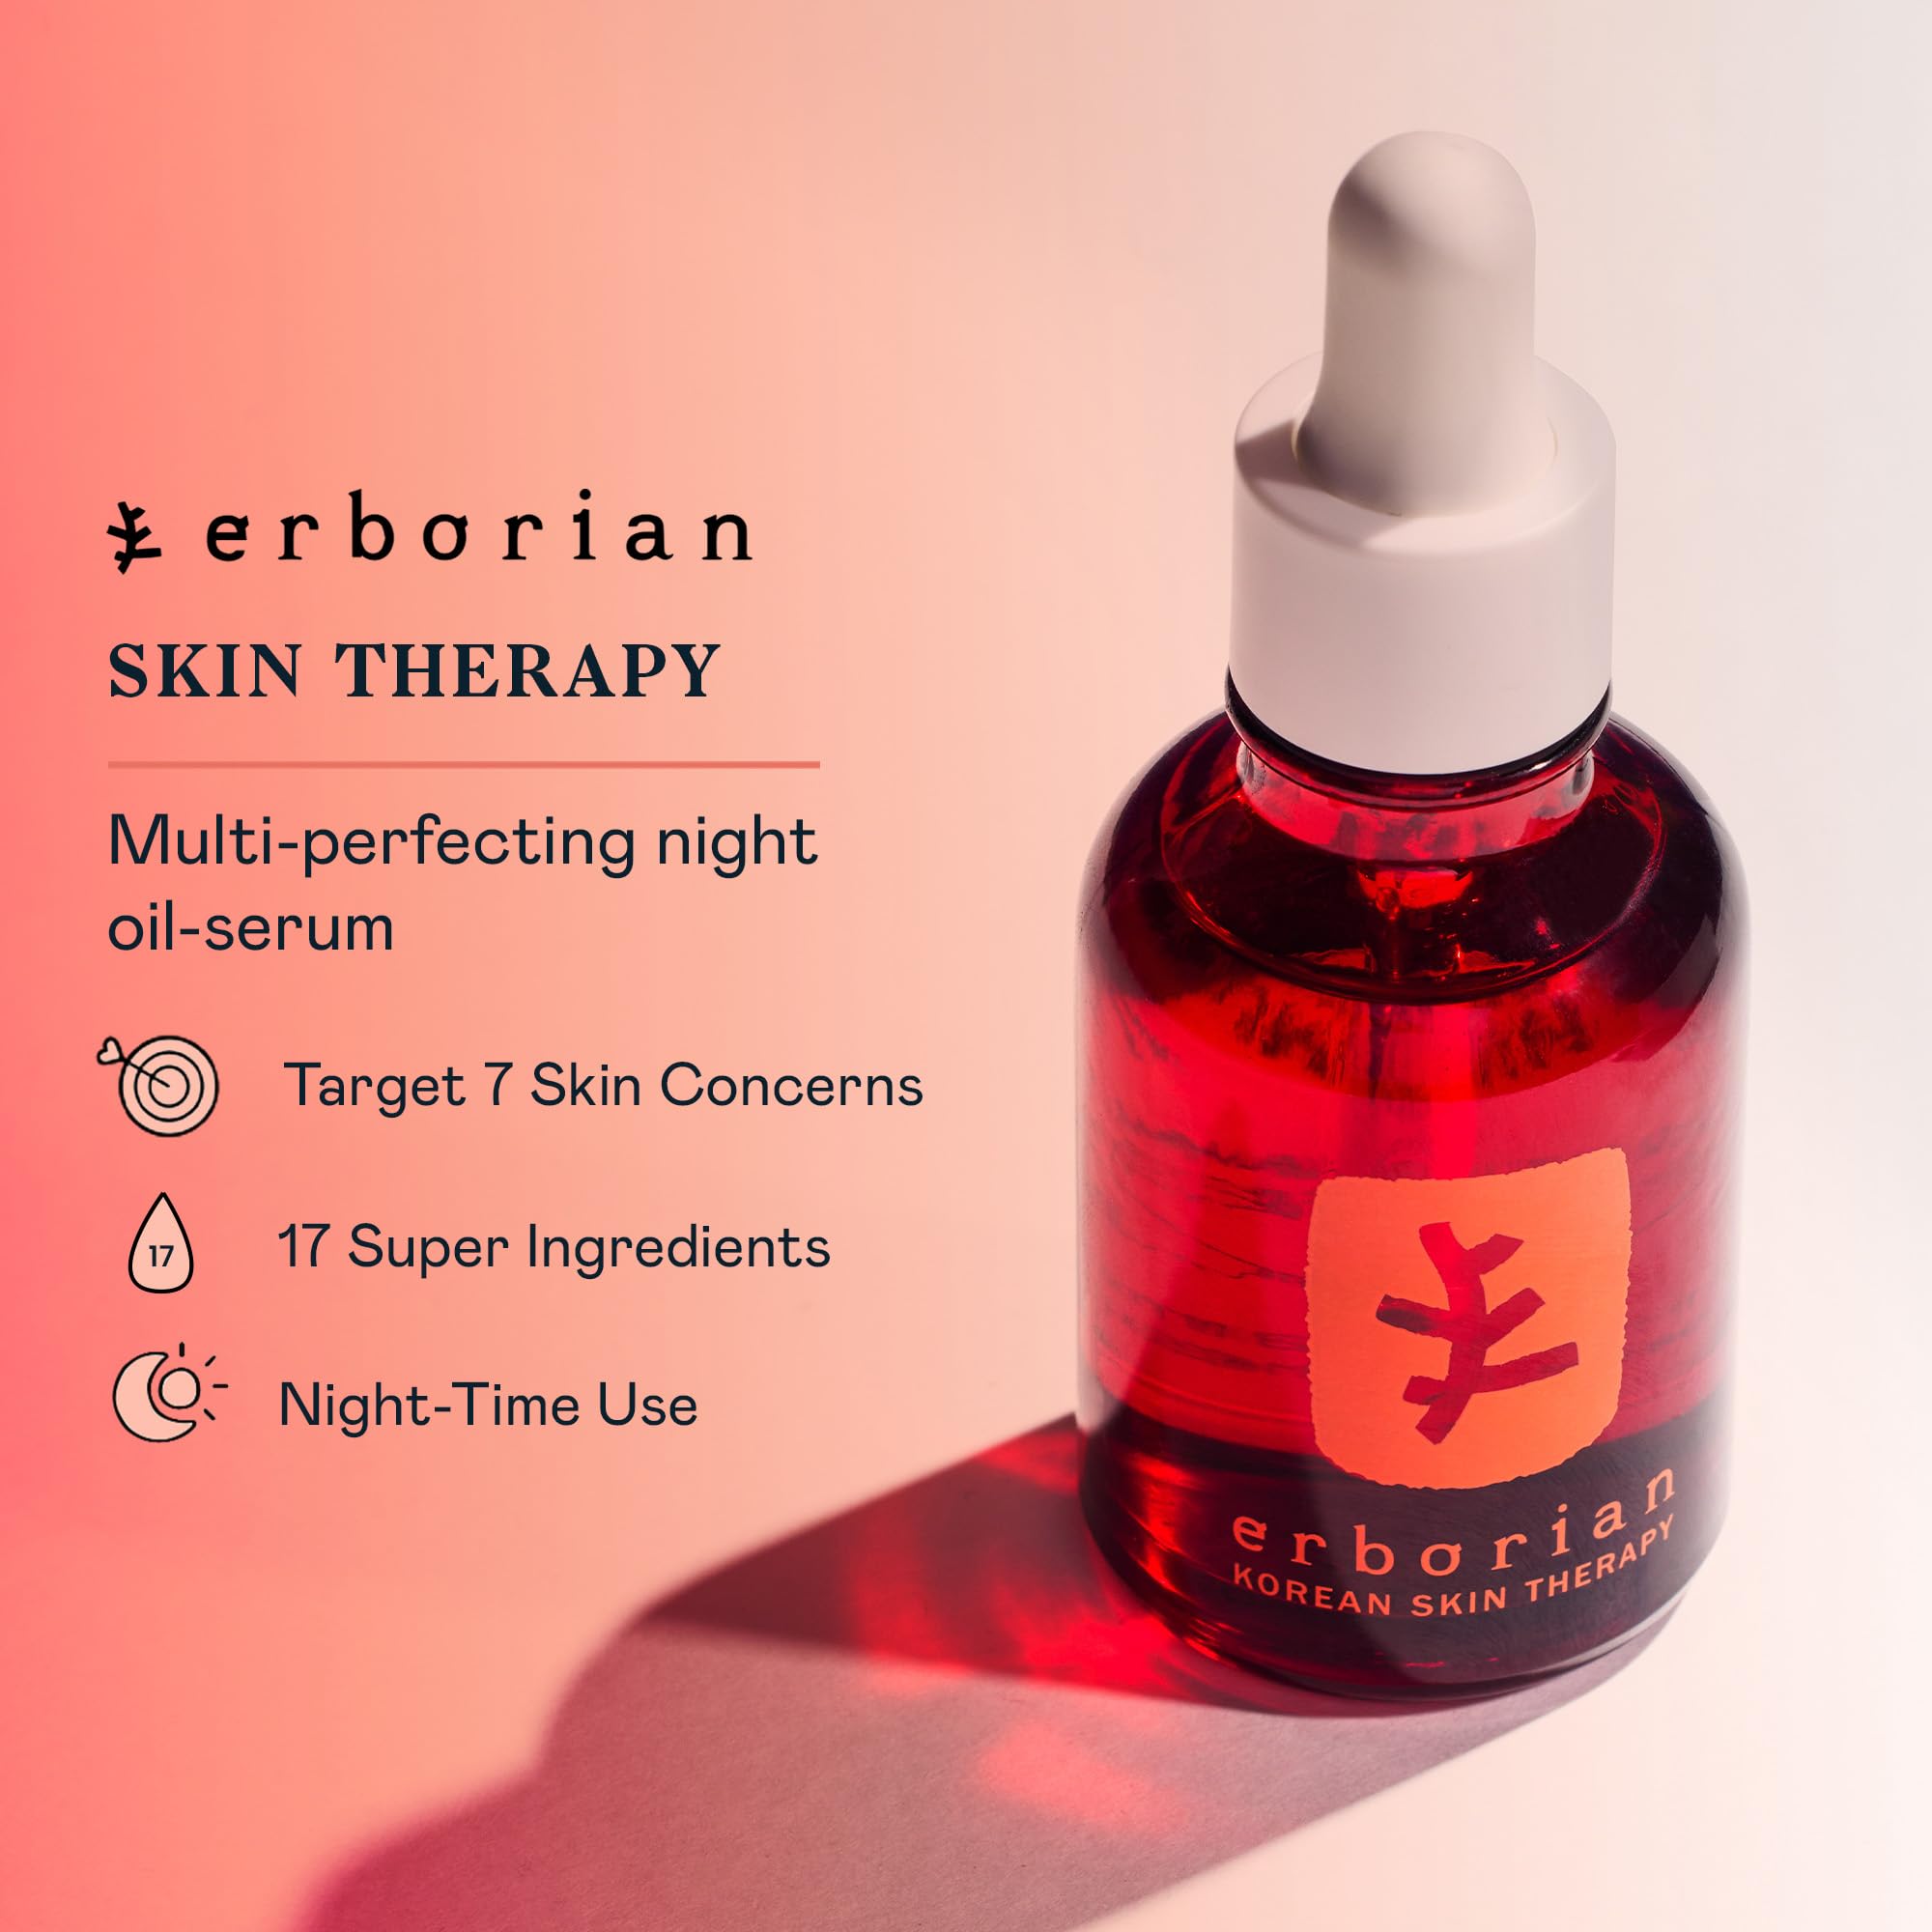 Skin Therapy Multi-Perfecting Bi-Phase Night Oil-Serum - Supercharged With 17 Ingredients -Targets 7 Skin Concerns- Improves Appearance of Fine Lines, Skin Texture and Complexion Evenness (0.33 Fl Oz)